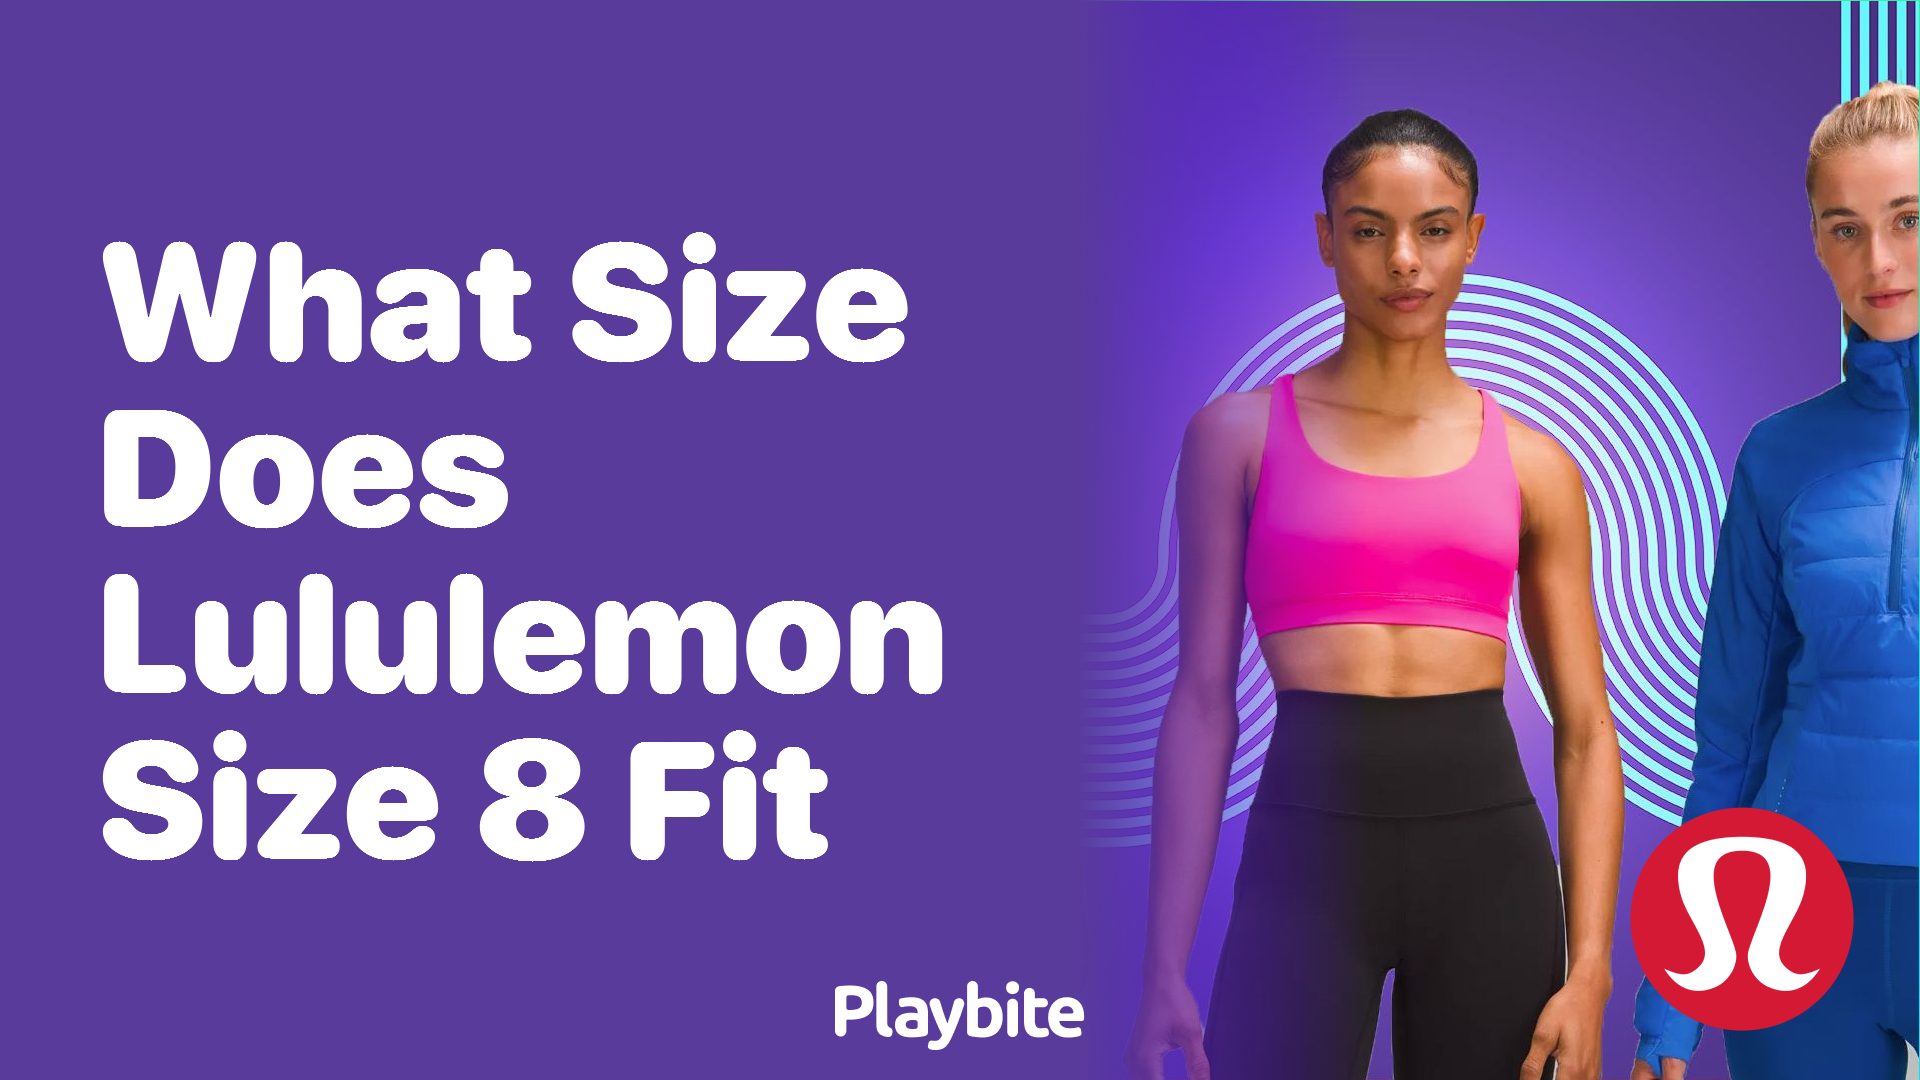 What Size Does Lululemon Size 8 Fit? - Playbite